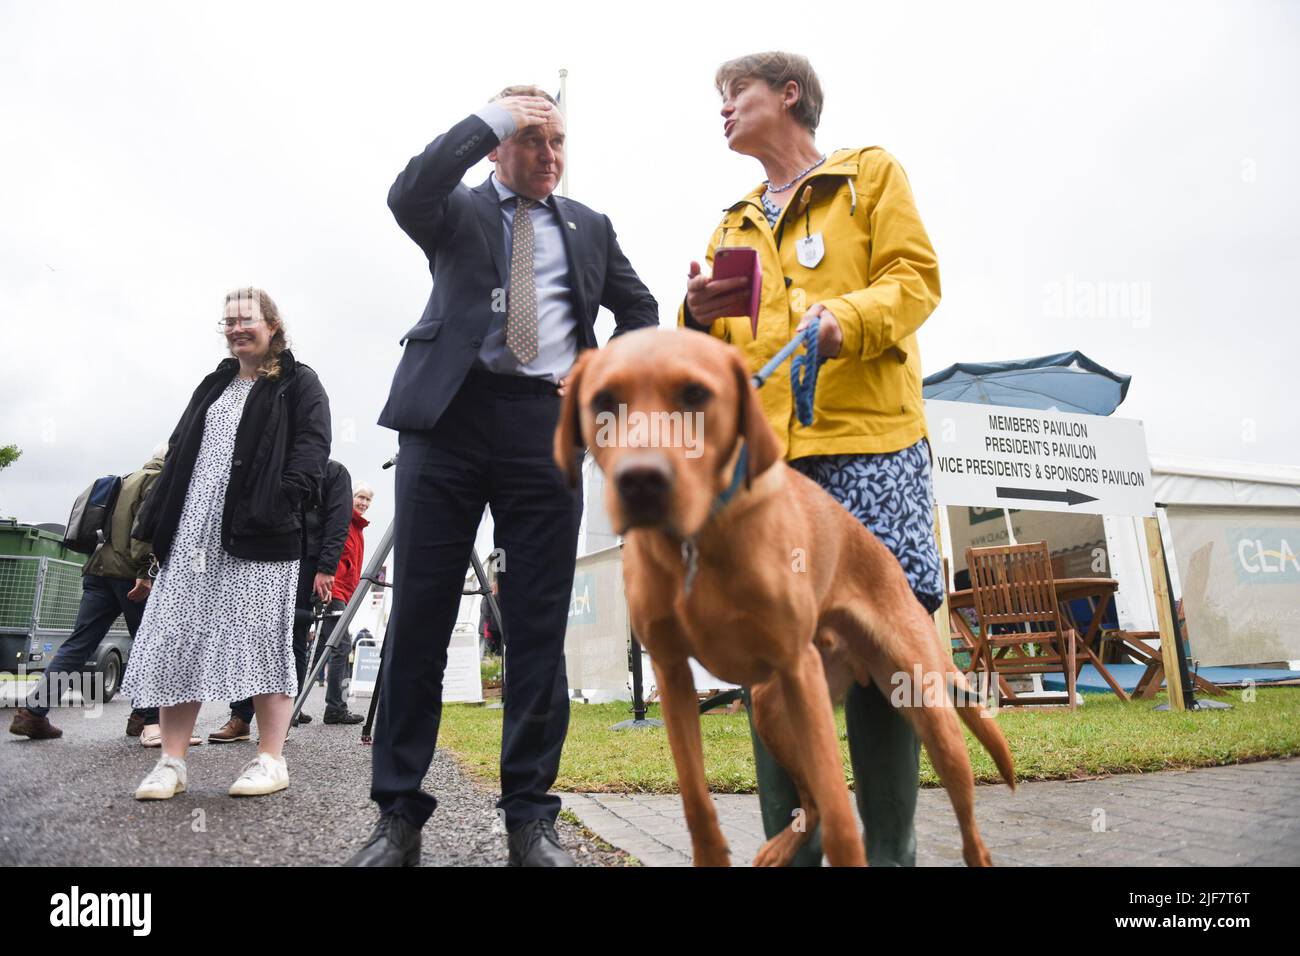 George Eustice MP, Secretary of State for Environment, Food and Rural Affairs of the United Kingdom, MP For Camborne, Meets with Selaine Saxby MP for North Cornwall, and her Dog Henry. At the Devon County Show. Stock Photo